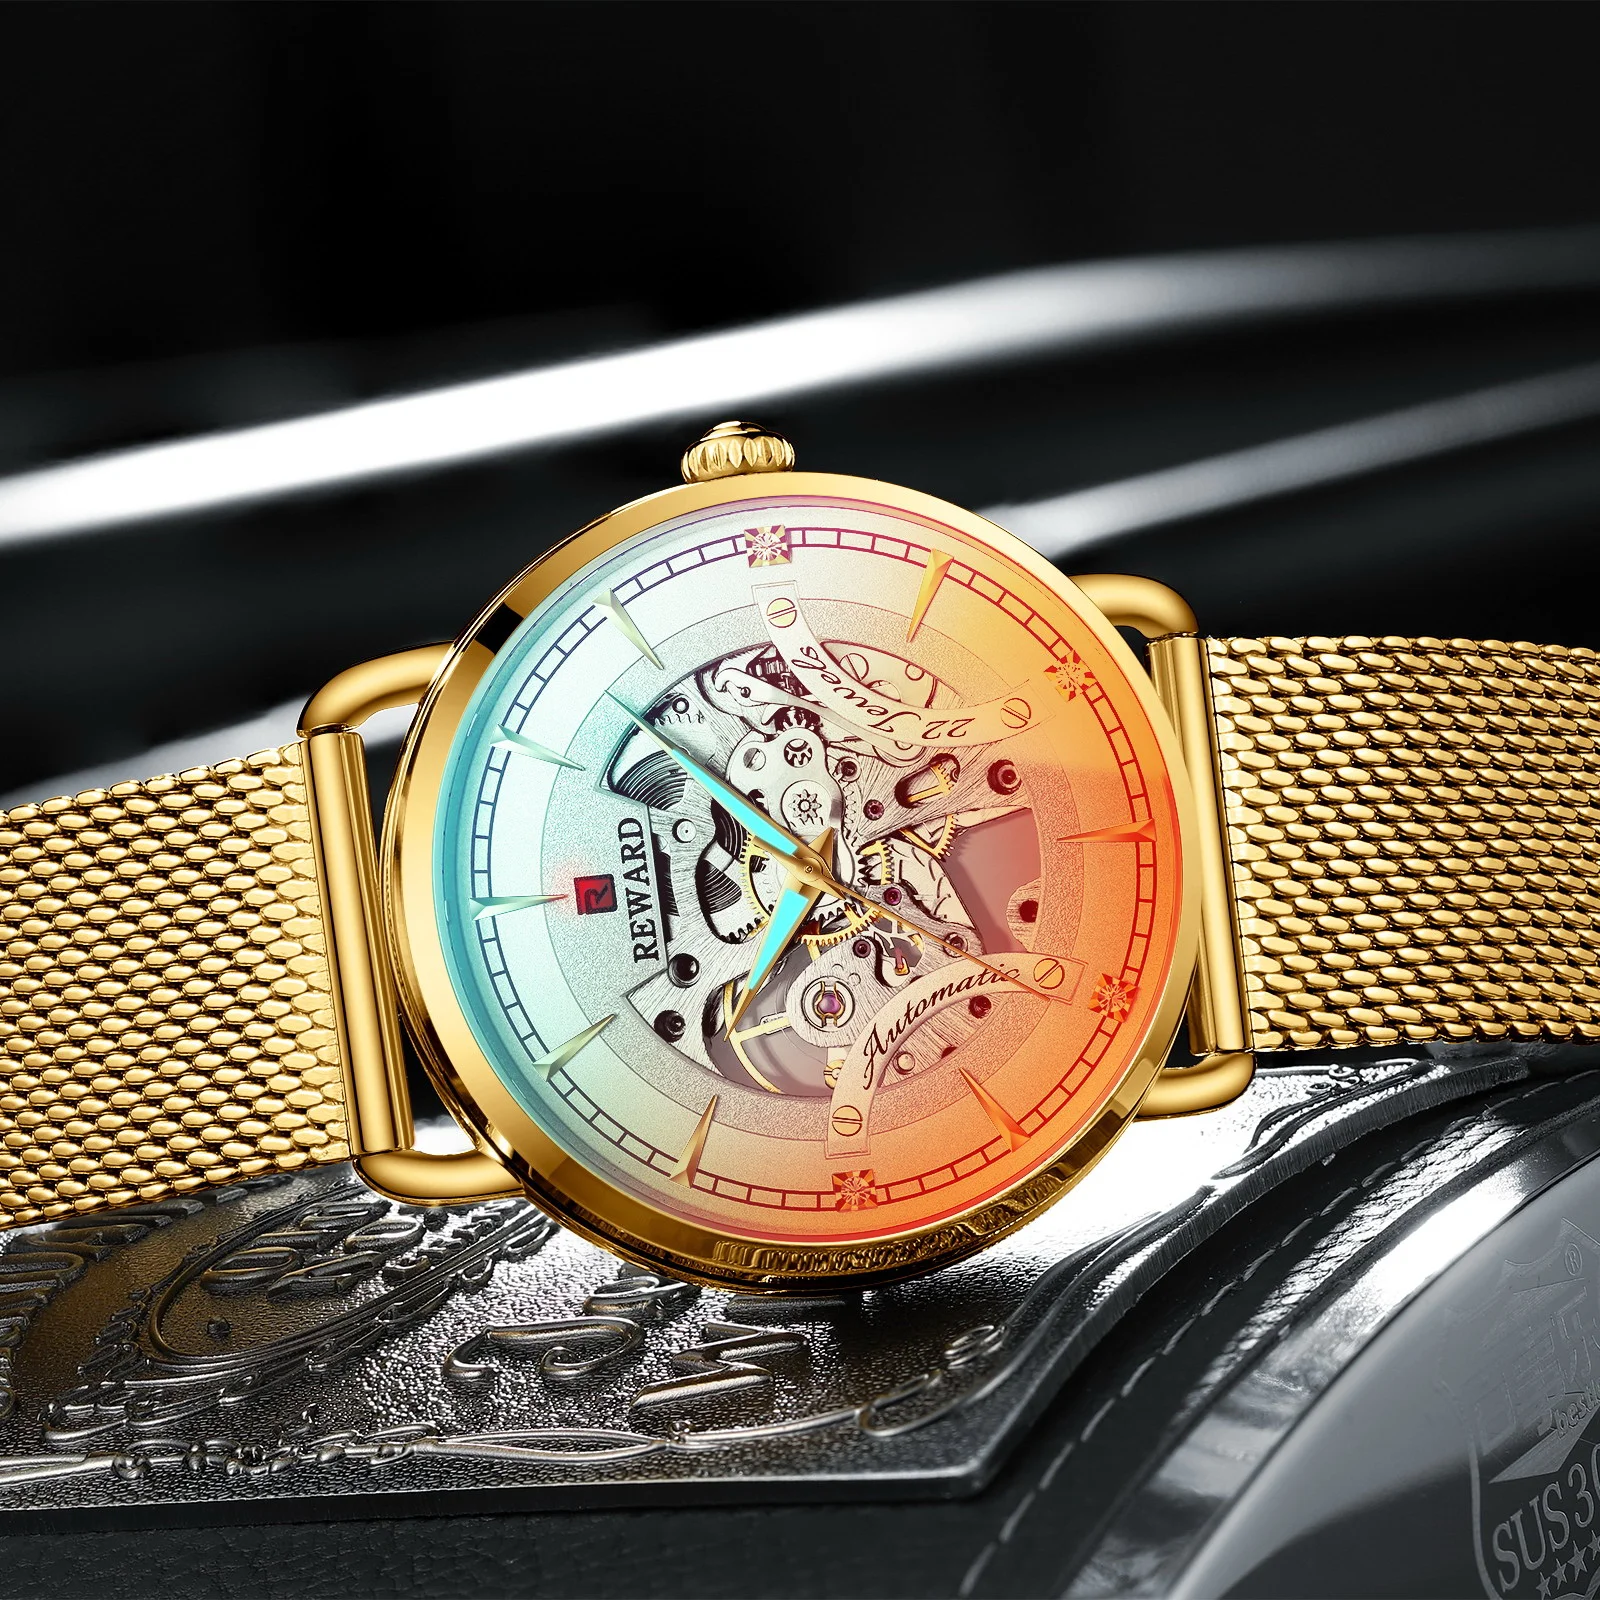 Reward Watch - A Leading China Manufacturer of High-Quality Watches